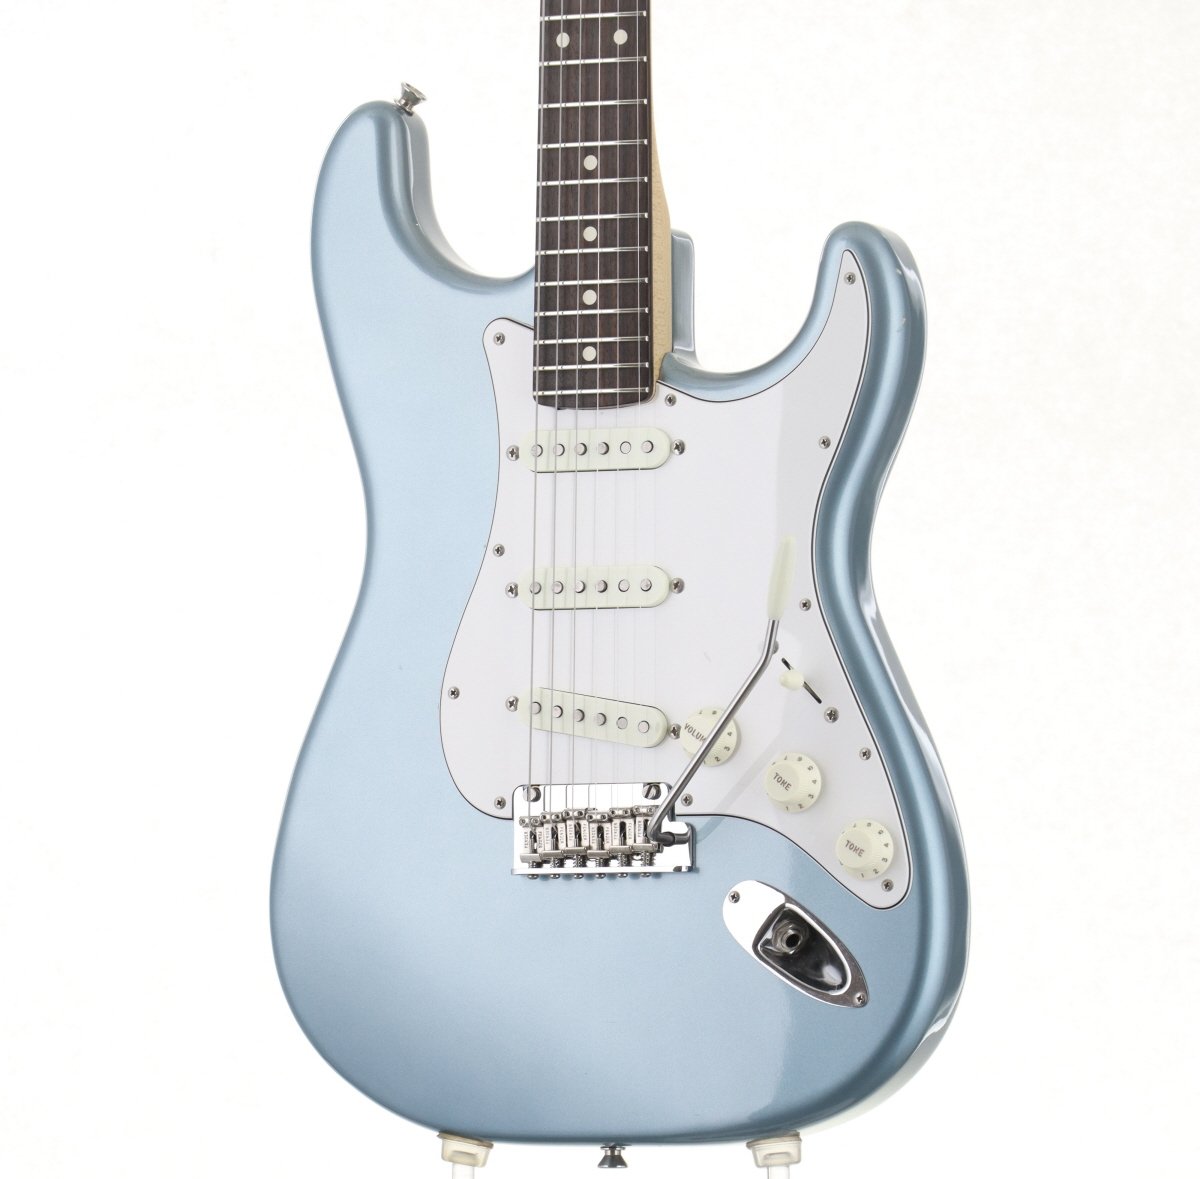 [SN JD19003458] USED Fender / Made in Japan 2019 Limited Collection Stratocaster Ice Blue Metallic [03]